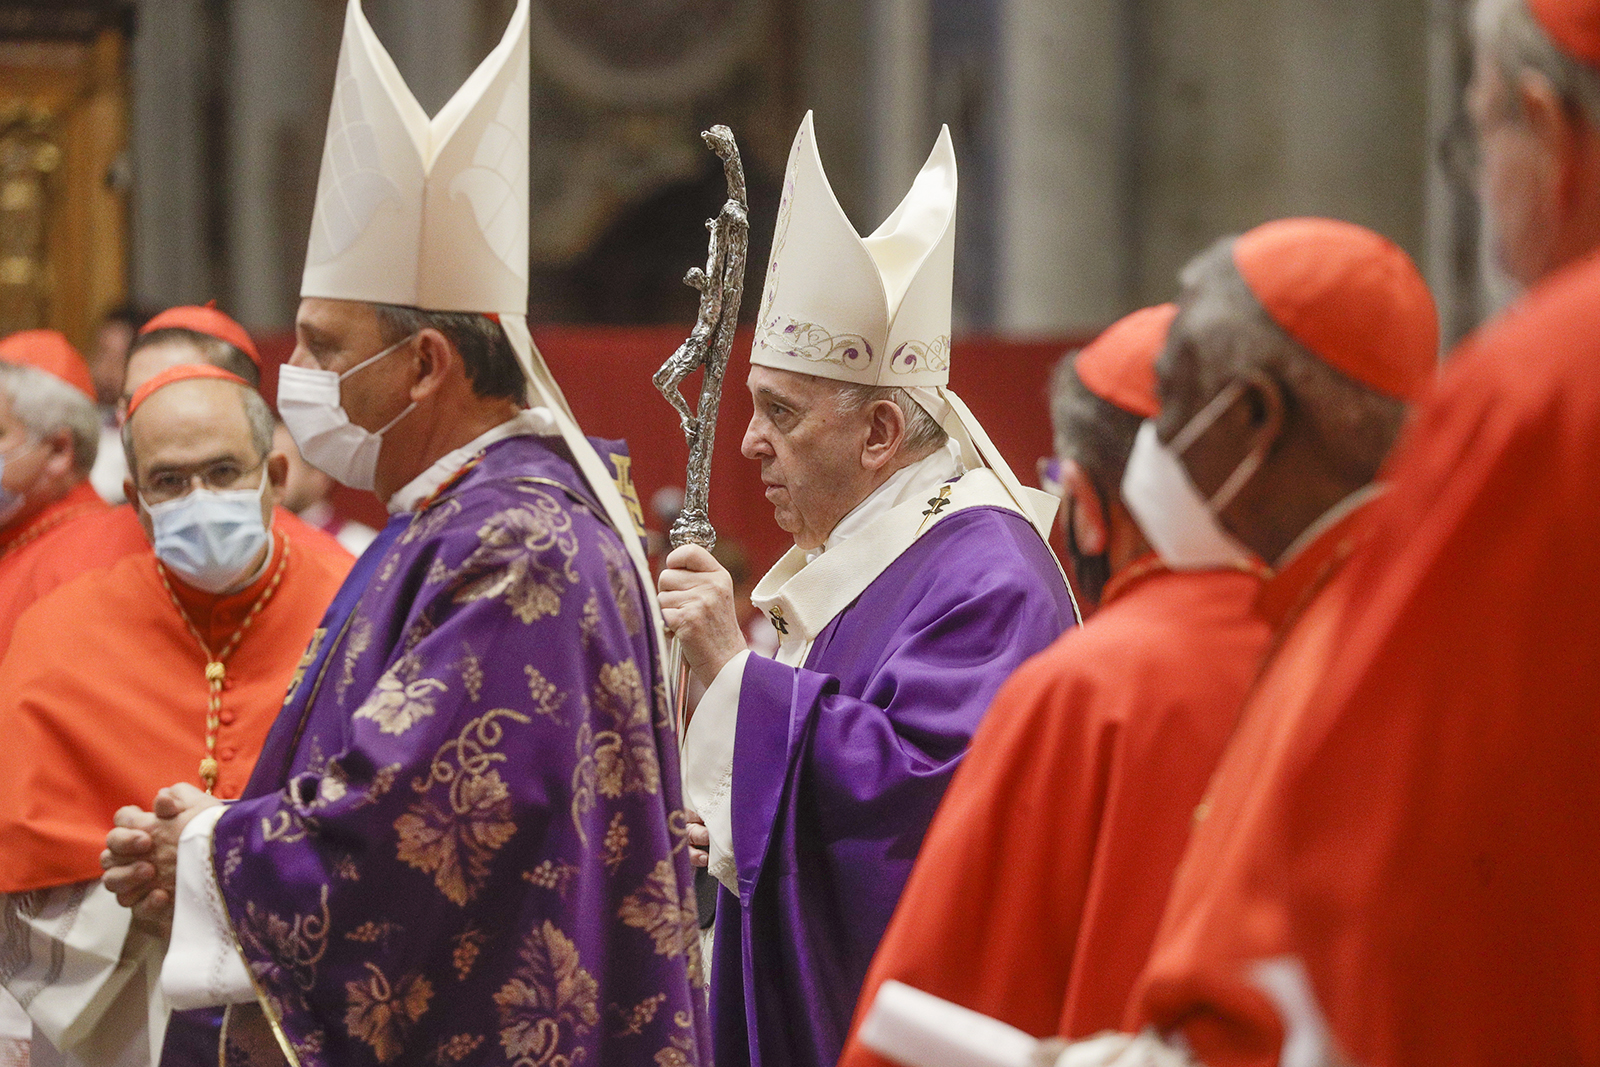 Pope Francis arrives to celebrate Mass the day after the elevation of 13 new cardinals to the highest rank in the Catholic hierarchy, at St. Peter's Basilica, Sunday, Nov. 29, 2020. (AP Photo/Gregorio Borgia, Pool)